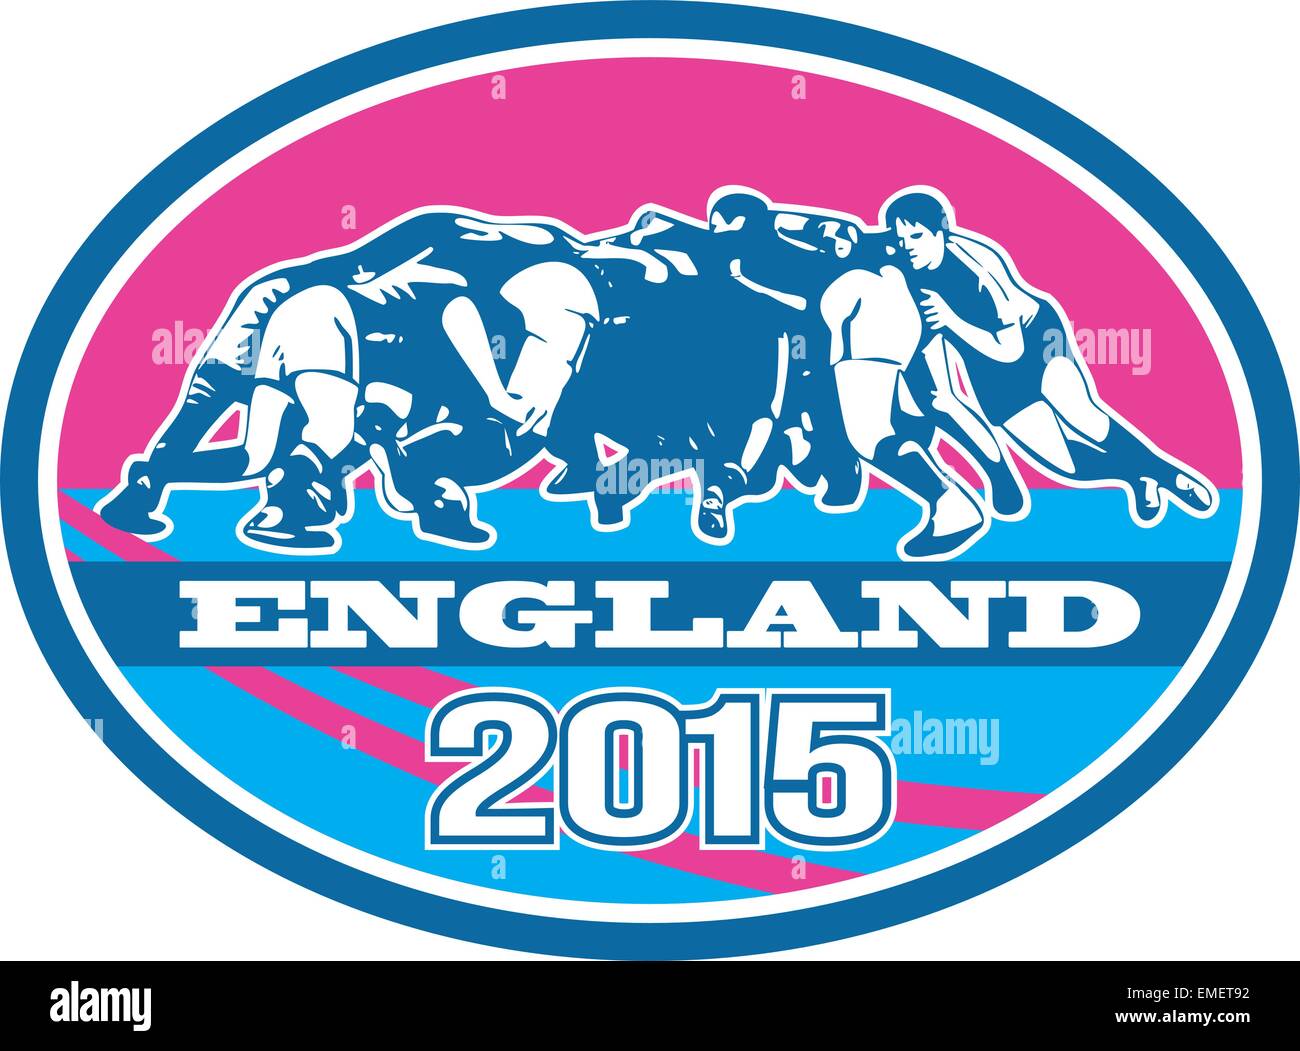 Rugby Scrum England 2015 Oval Stock Vector